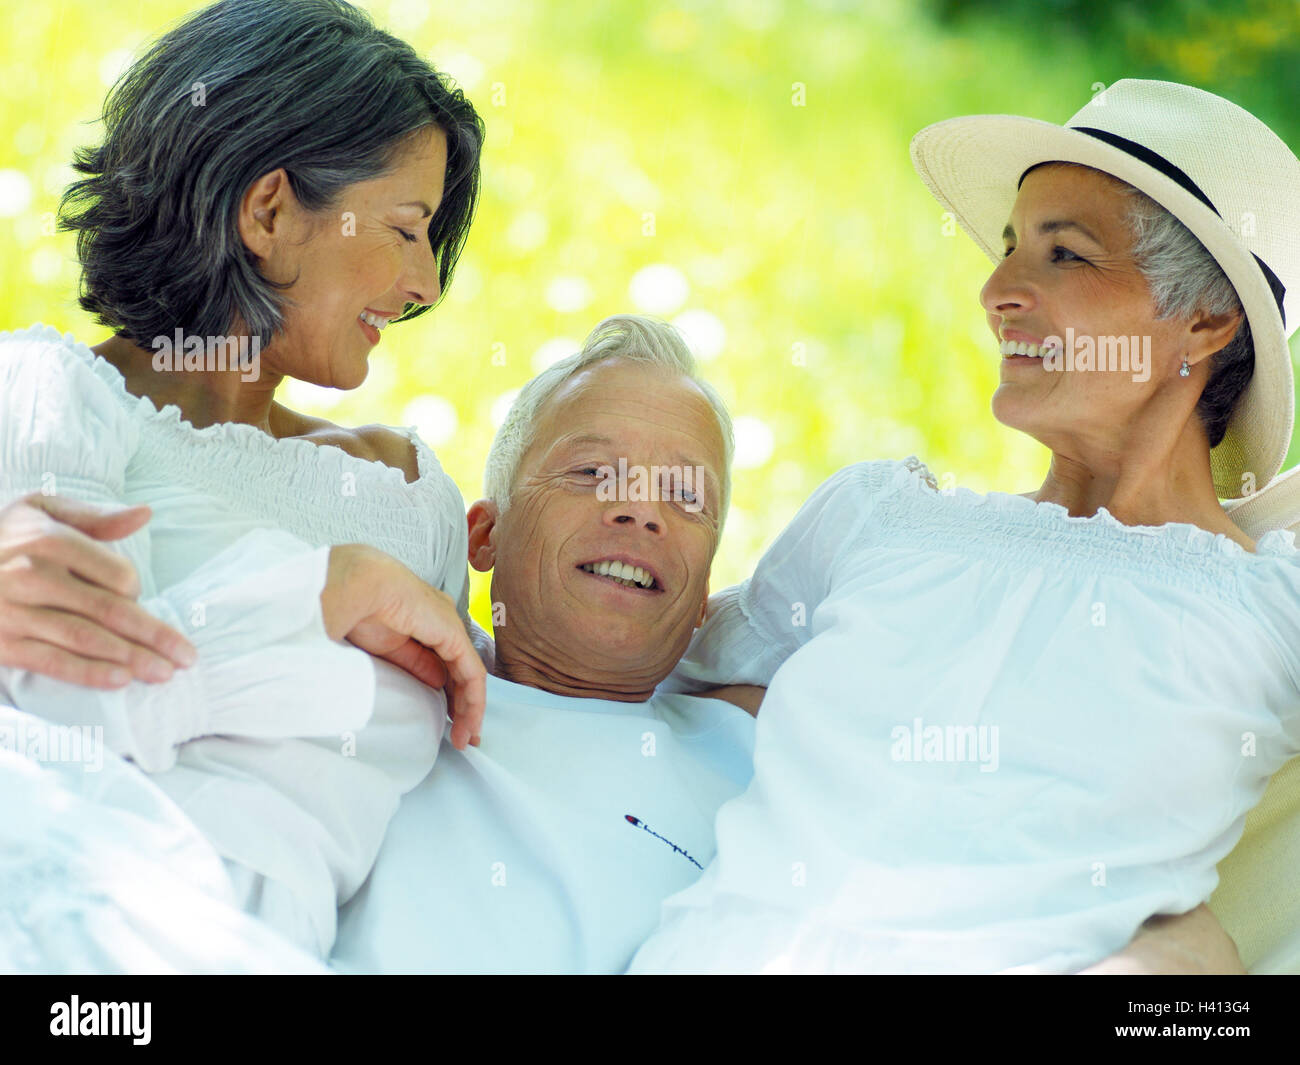 Garden, hammock, boss, women, two, arm in arm, détente, enjoy, happily, take it easy, man, seniors, friends, three, senior citizens, 50-60 years, 60-70 years, carefree, lighthearted, retirement, leisure time, enjoy, joy of living, joy of life, actively, fit, actively, health, Best of all Age, friends, Jung-remaining, fun, joy, Liefestyle, luck, harmony, exhilarates, leisurewear, clothes, white, ease, carefree nature, amusement, summer, outside, sunny, women's dream, swarms, embrace, touch, suture, affection, rest, cheerfulness, smile, 'cock of the walk', summer, outside Stock Photo